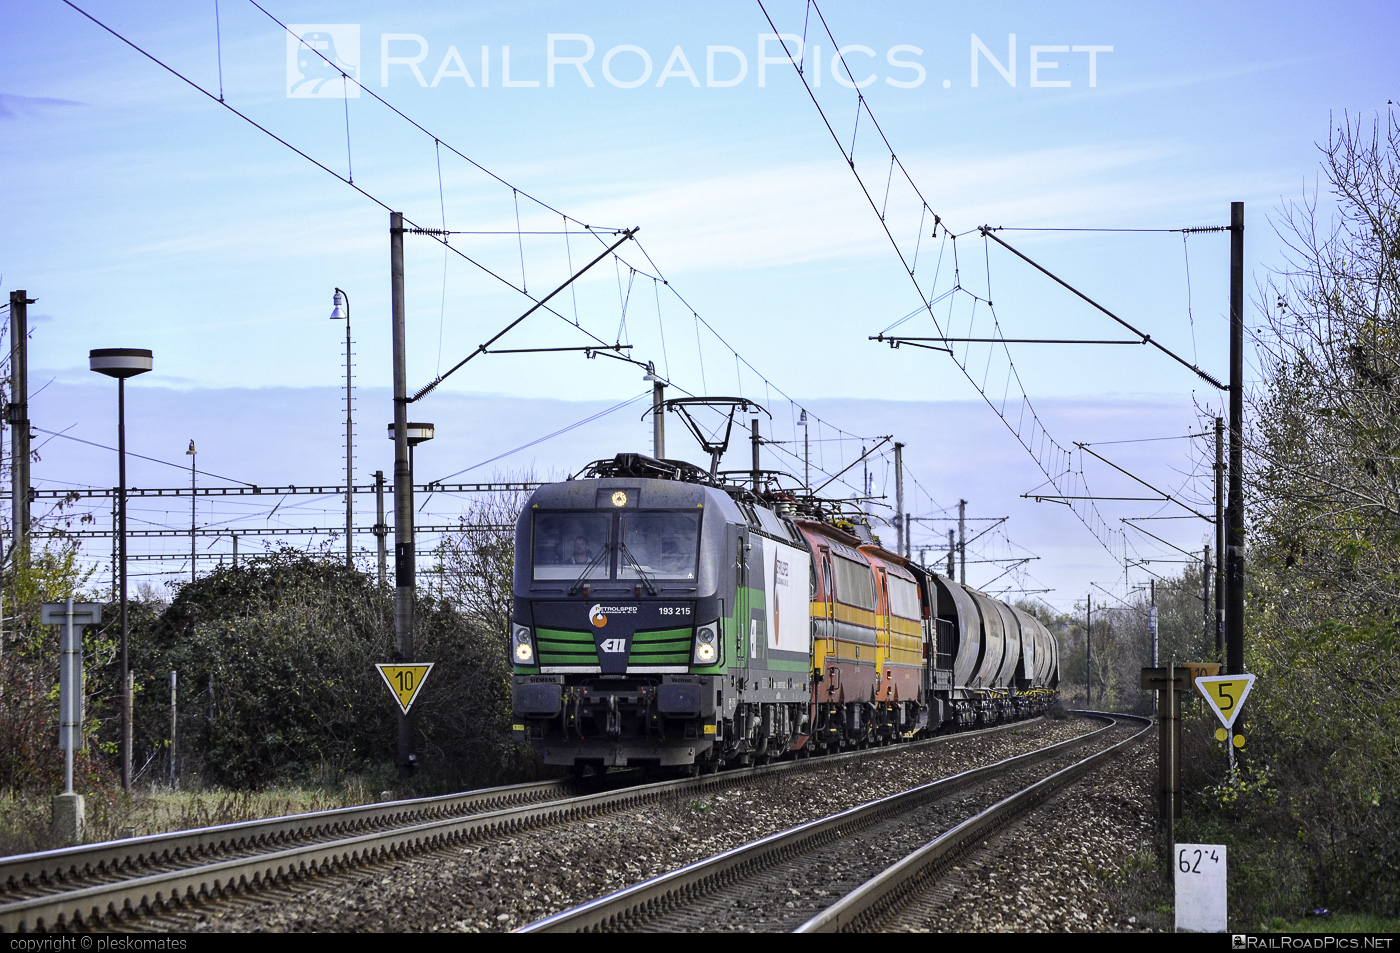 Siemens Vectron MS - 193 215 operated by PETROLSPED Slovakia s.r.o. #ell #ellgermany #eloc #europeanlocomotiveleasing #hopperwagon #petrolsped #petrolspedSlovakia #petrolspedSlovakiaSro #railLog #railLogSro #siemens #siemensVectron #siemensVectronMS #transcereales #vectron #vectronMS